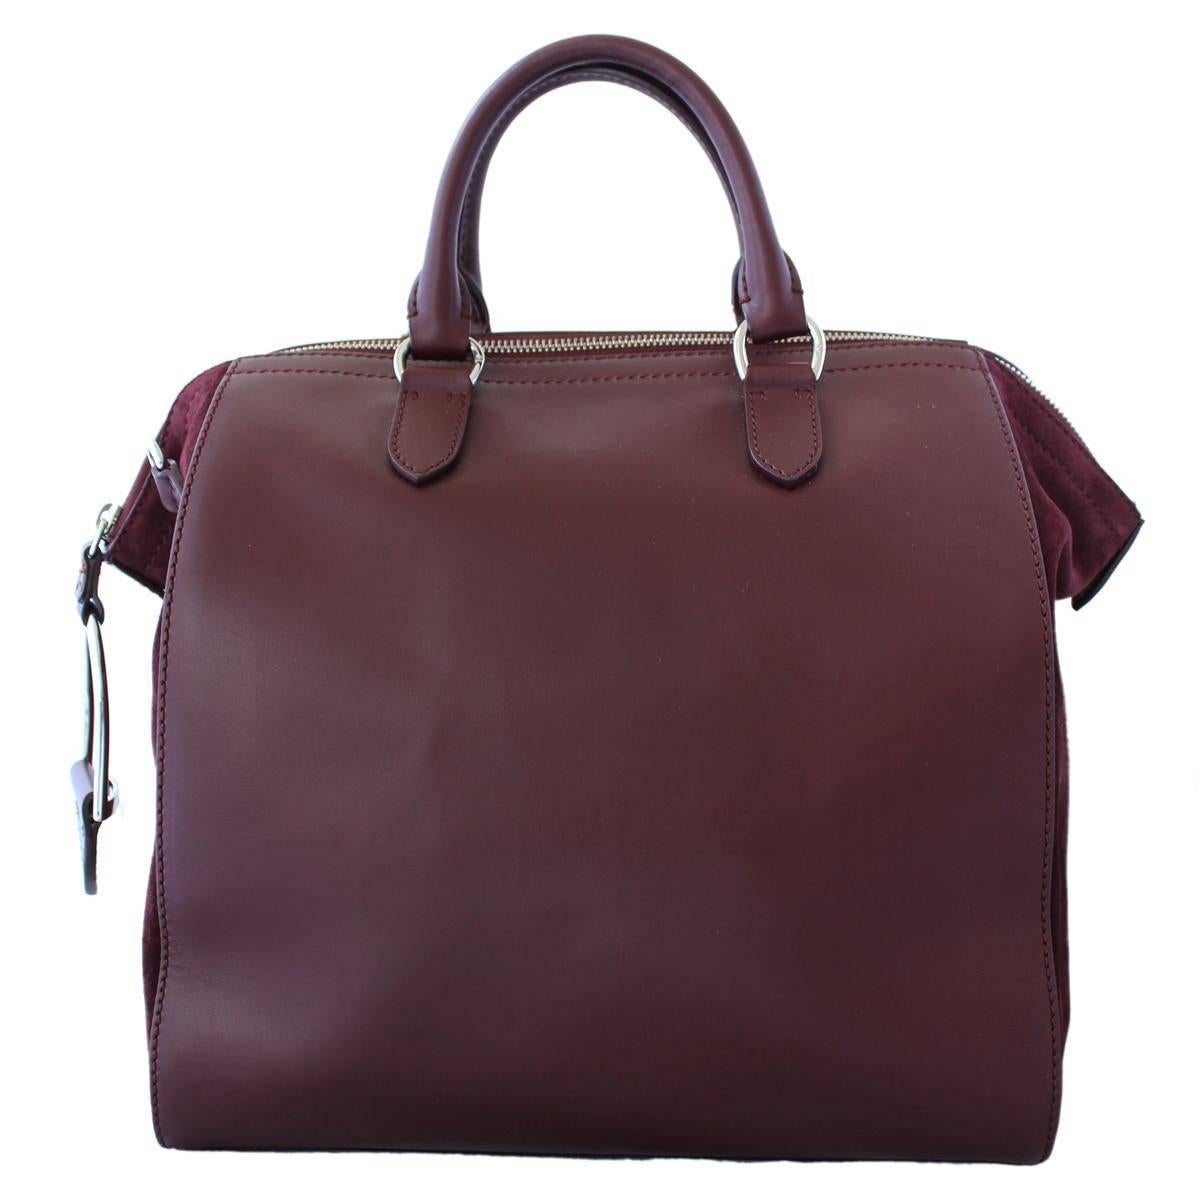 Superb Ralph Lauren bag
Calfskin leather
Bordeaux color
Lateral buckskin 
Two handles
Can be carried crossbody too
External pocket
Zip closure
Trapeze shape
Cm 44 x 30 x 14 (17.3 x 11.8 x 5.5 inches)

Condition: Excellent, with dustbag
Worldwide